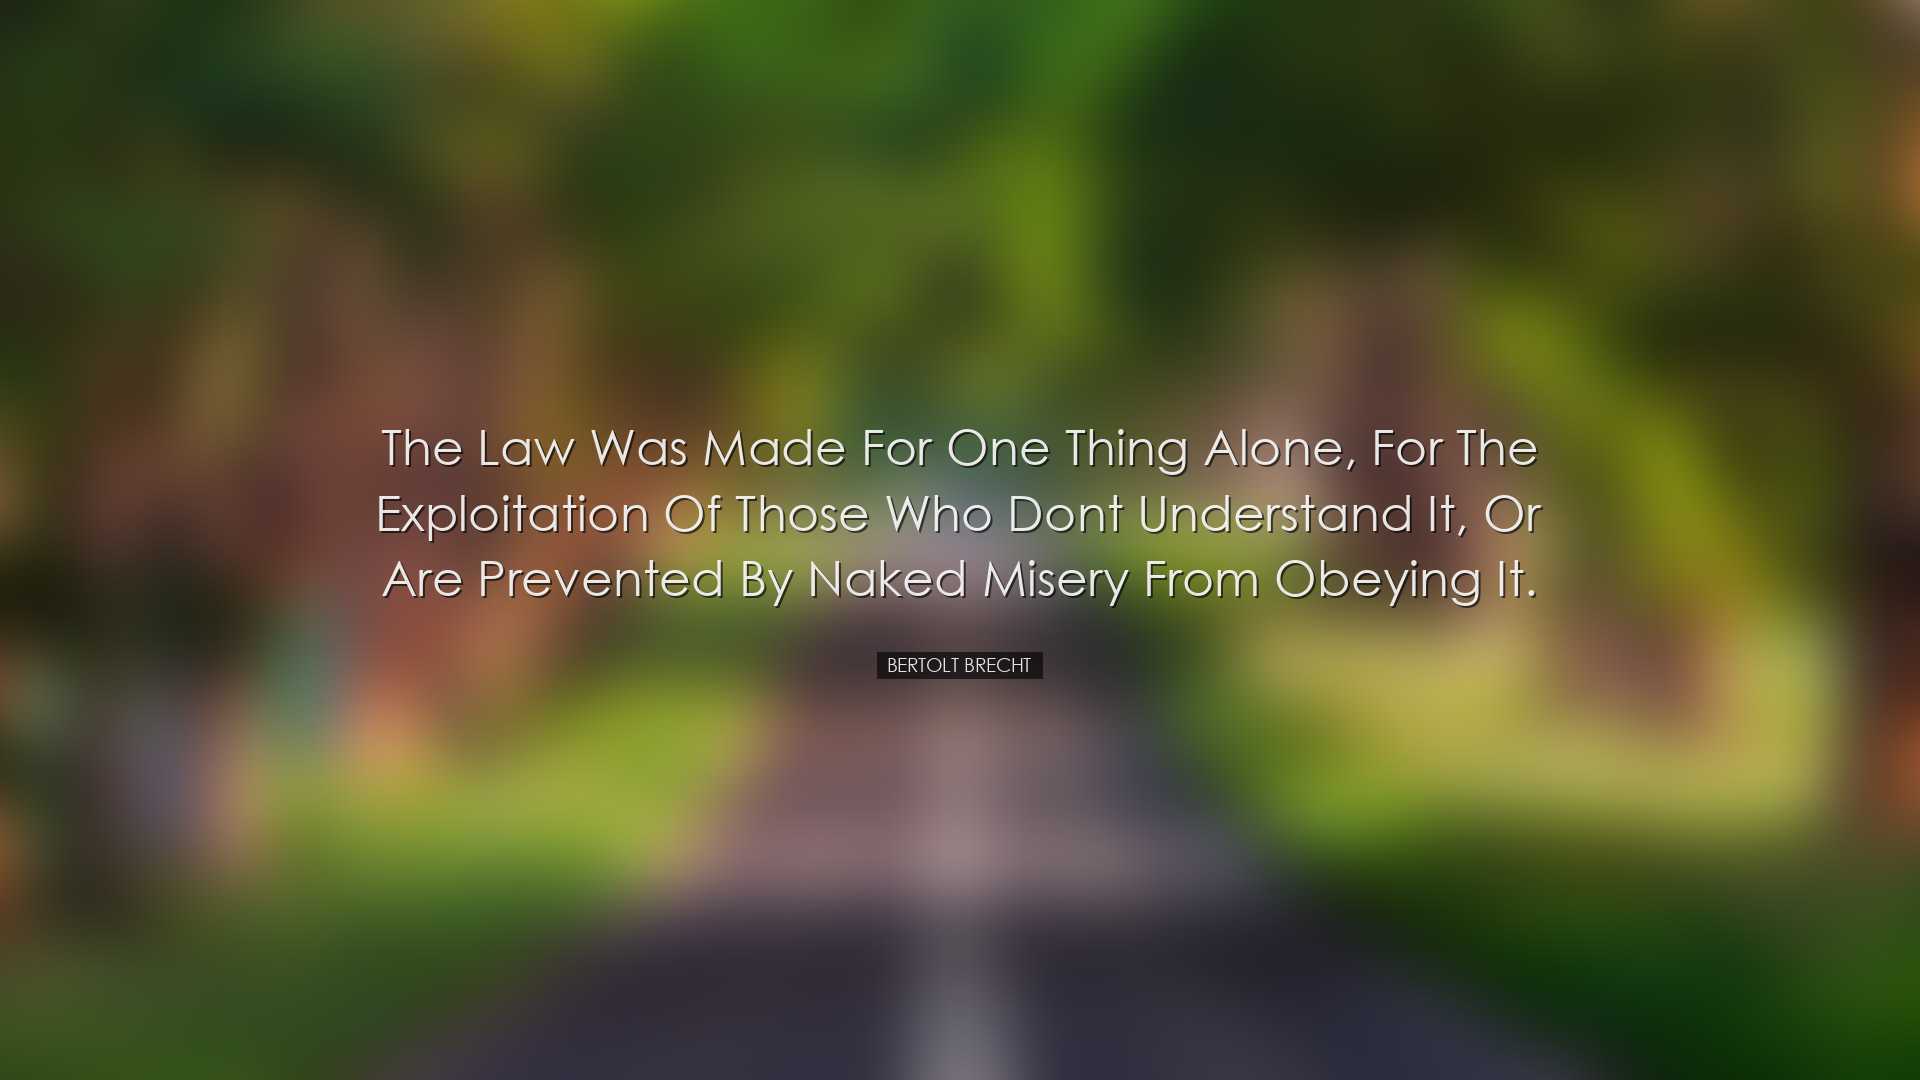 The law was made for one thing alone, for the exploitation of thos